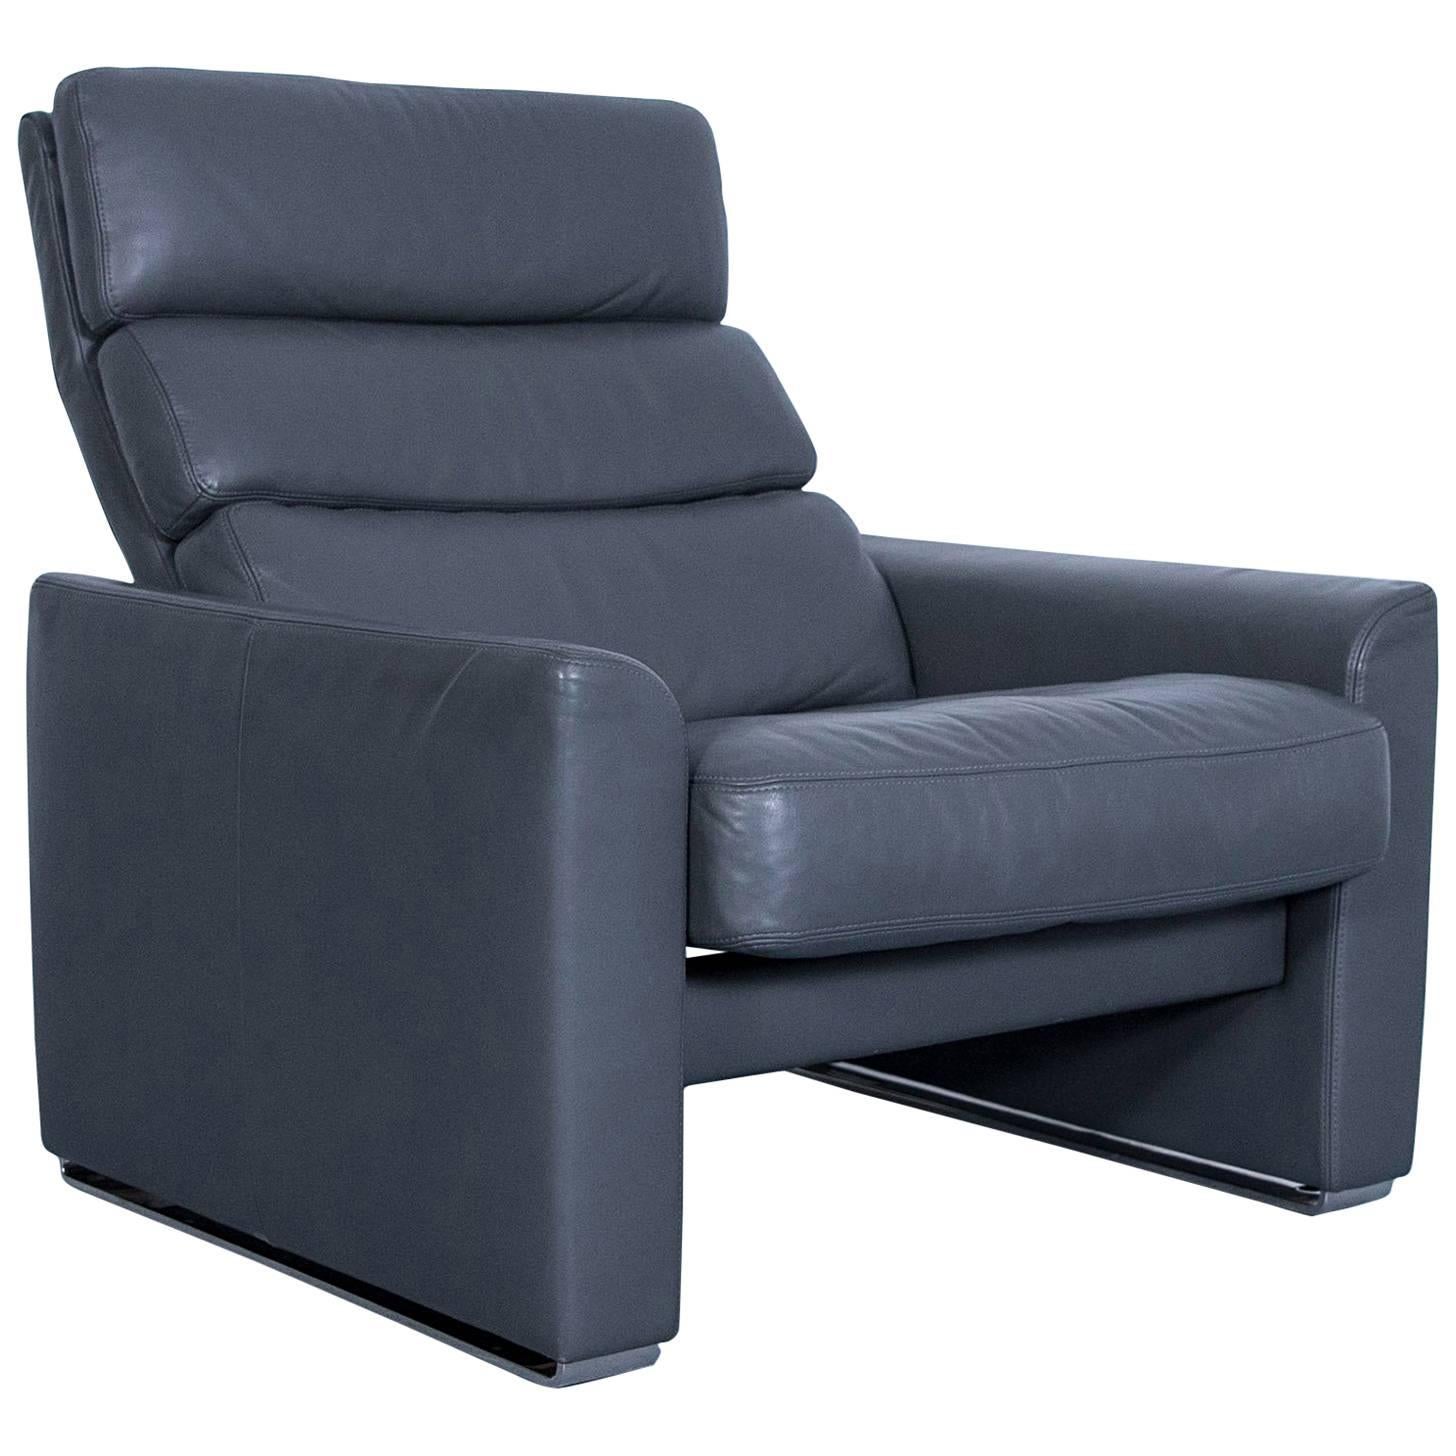 Erpo Soho Designer Armchair Leather Grey Anthracite One Seat Modern Function